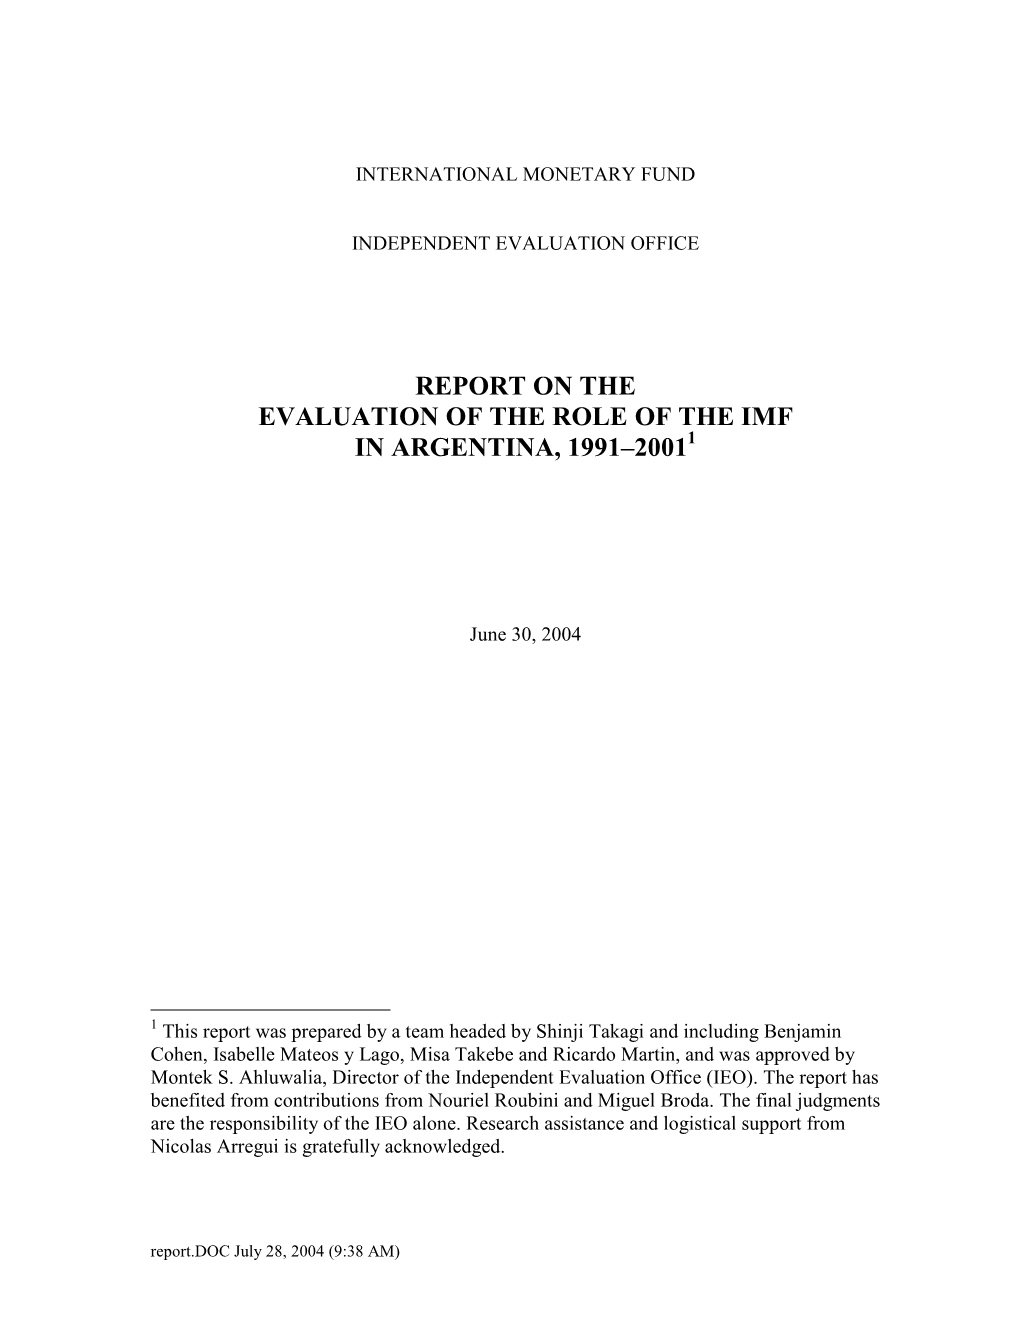 Report on the Evaluation of the Role of the IMF in Argentina, 1991–2001, June 30, 2004